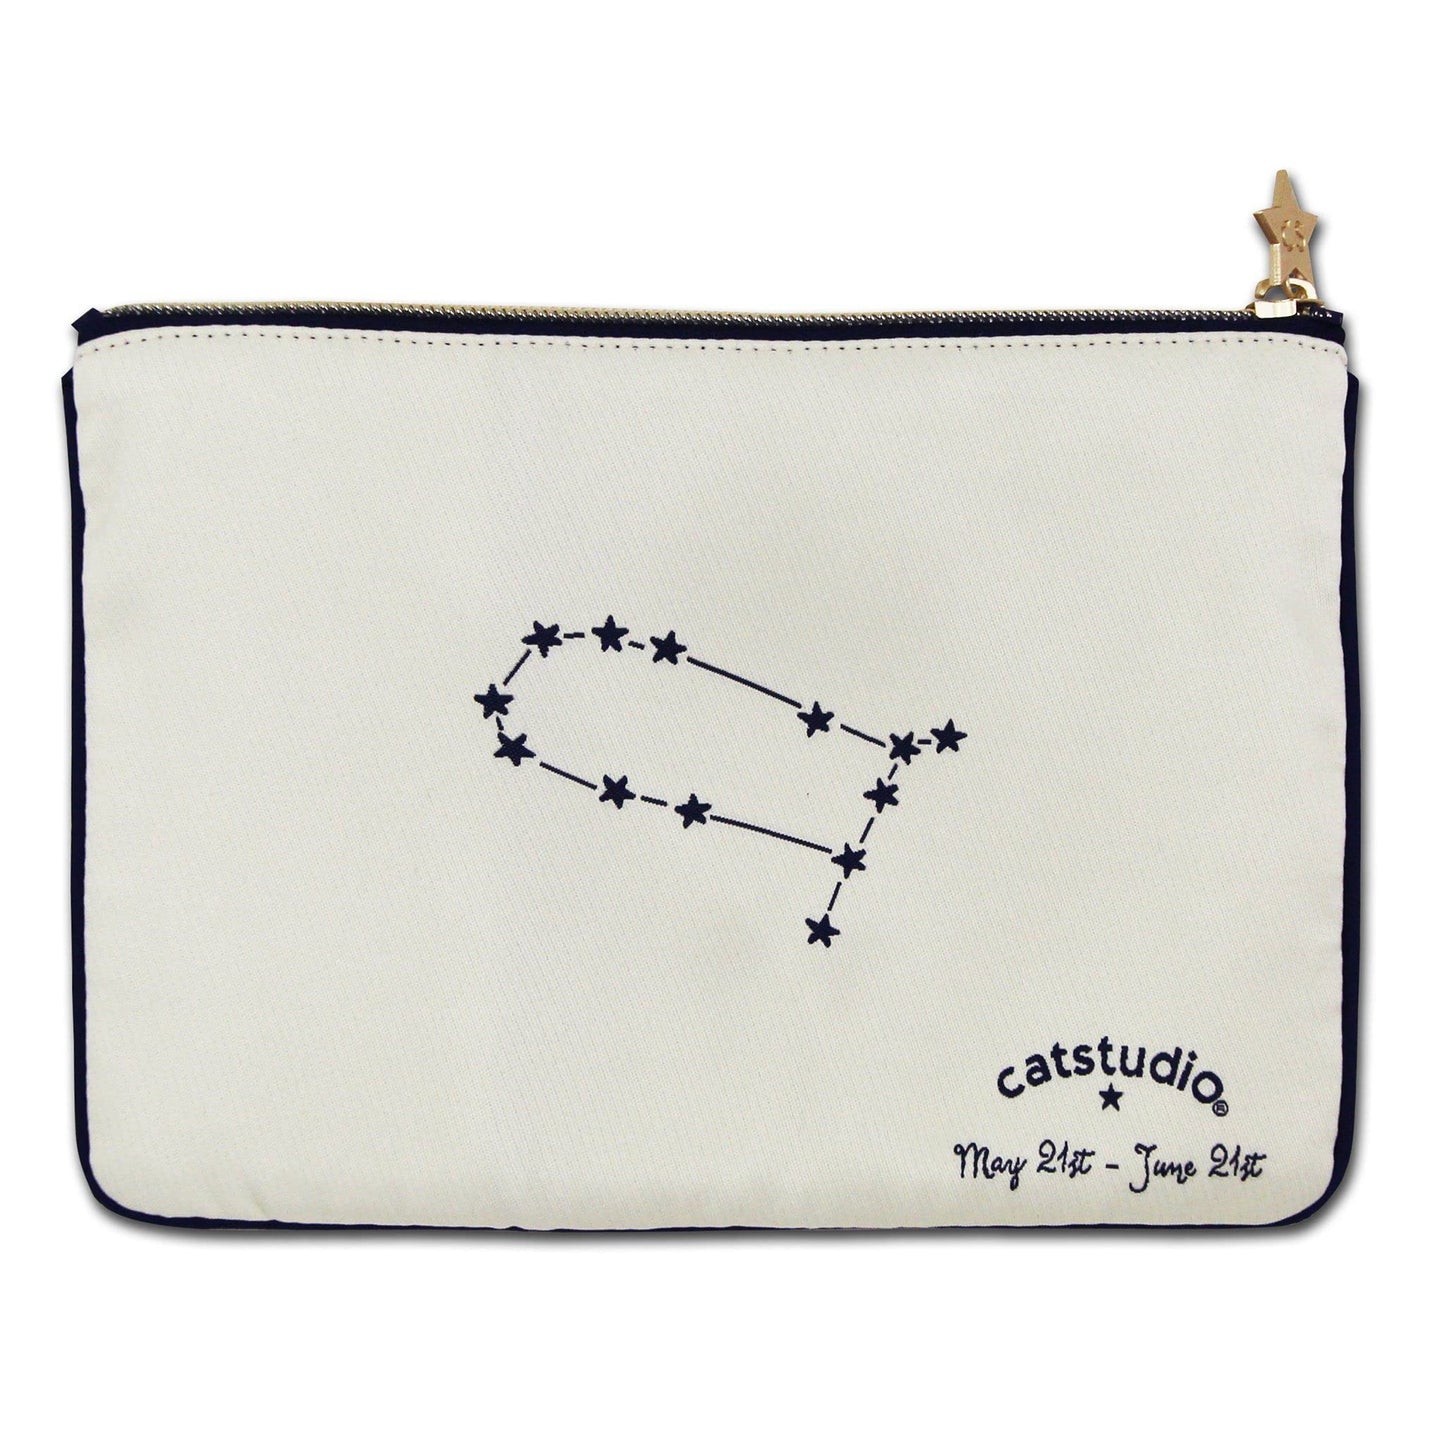 Catstudio Astrology Zipper Pouch, Gemini Zodiac Sign, Celebrate May & June Birthdays with Travel Toiletry Bag, 5 x 7, Ideal Gift for Geminis, Makeup Bag, Dog Treat Pouch, or Travel Purse Pouch